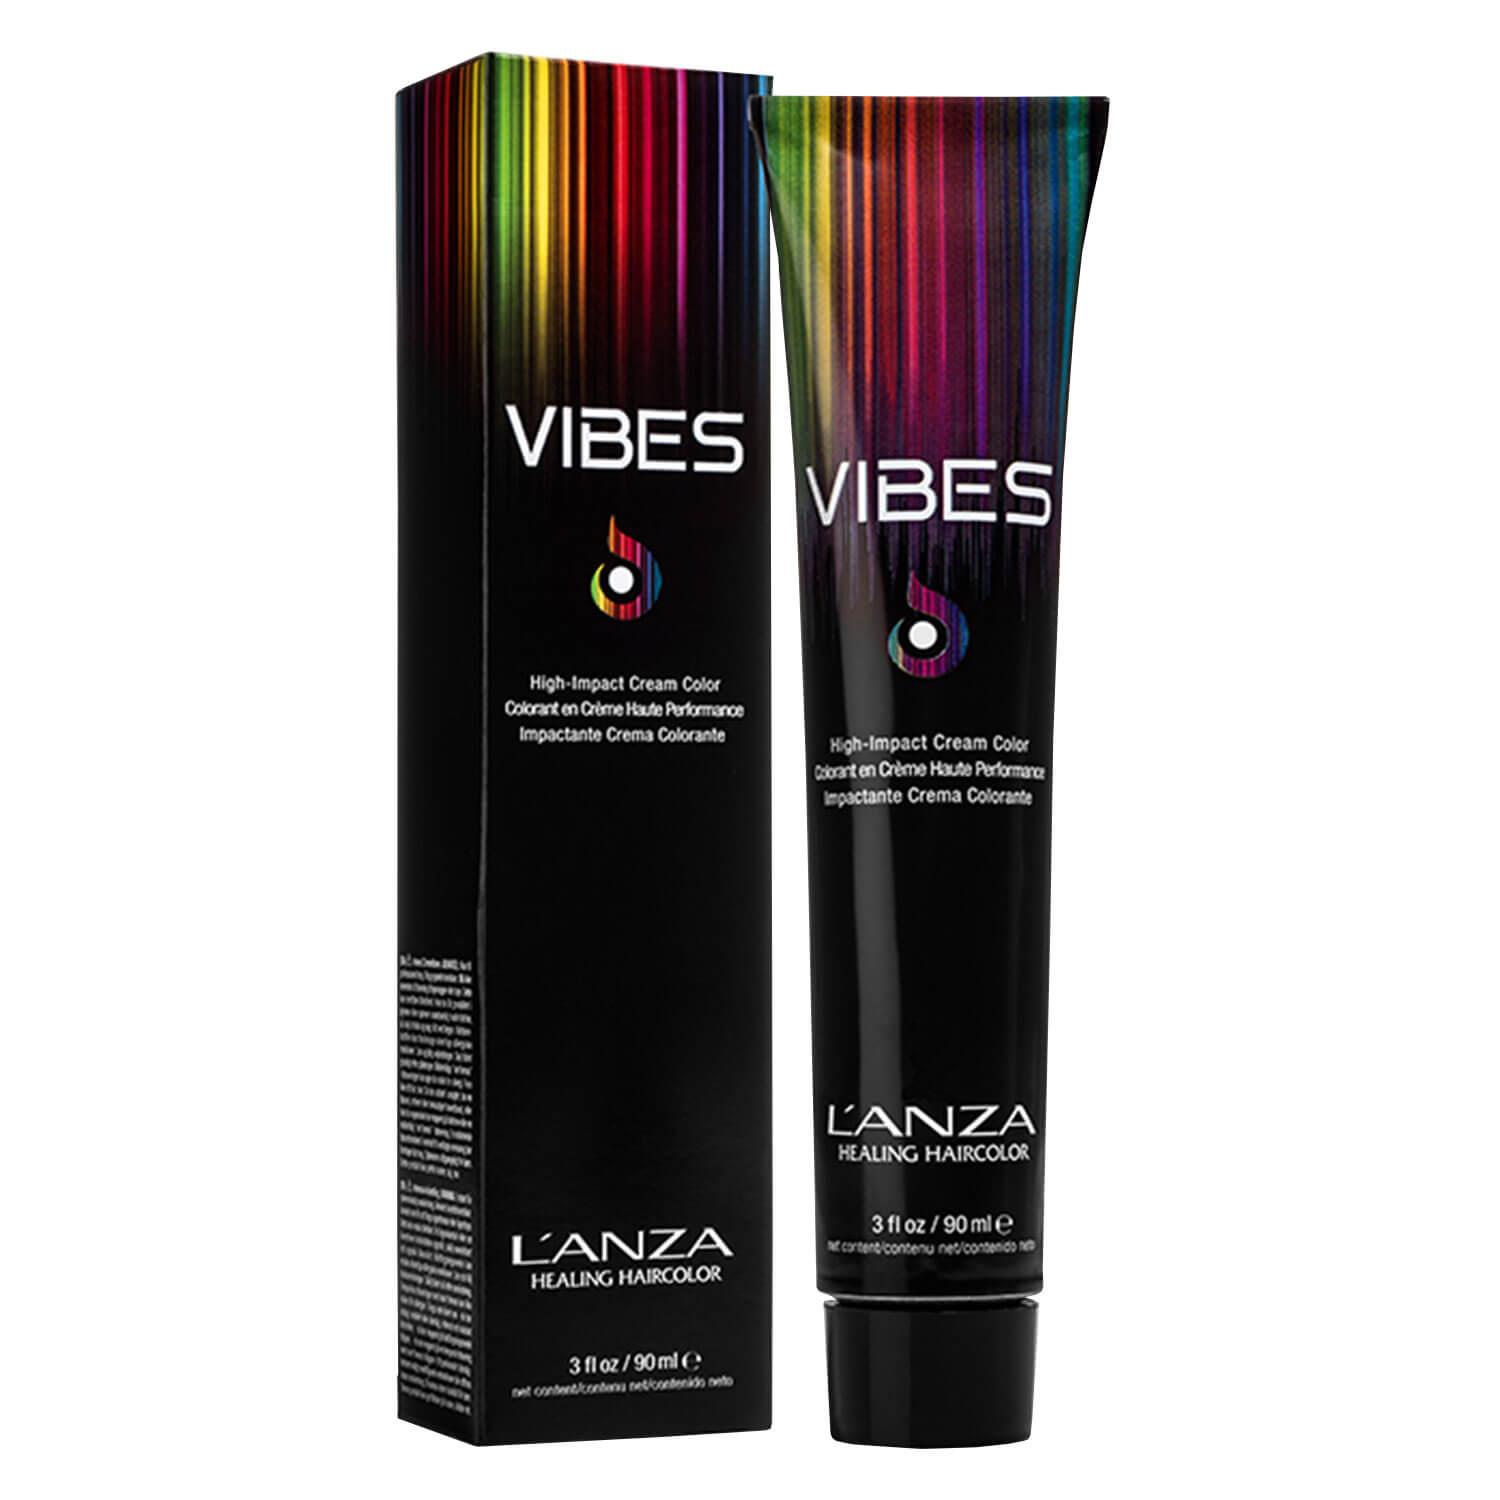 VIBES - High-Impact Cream Color Red